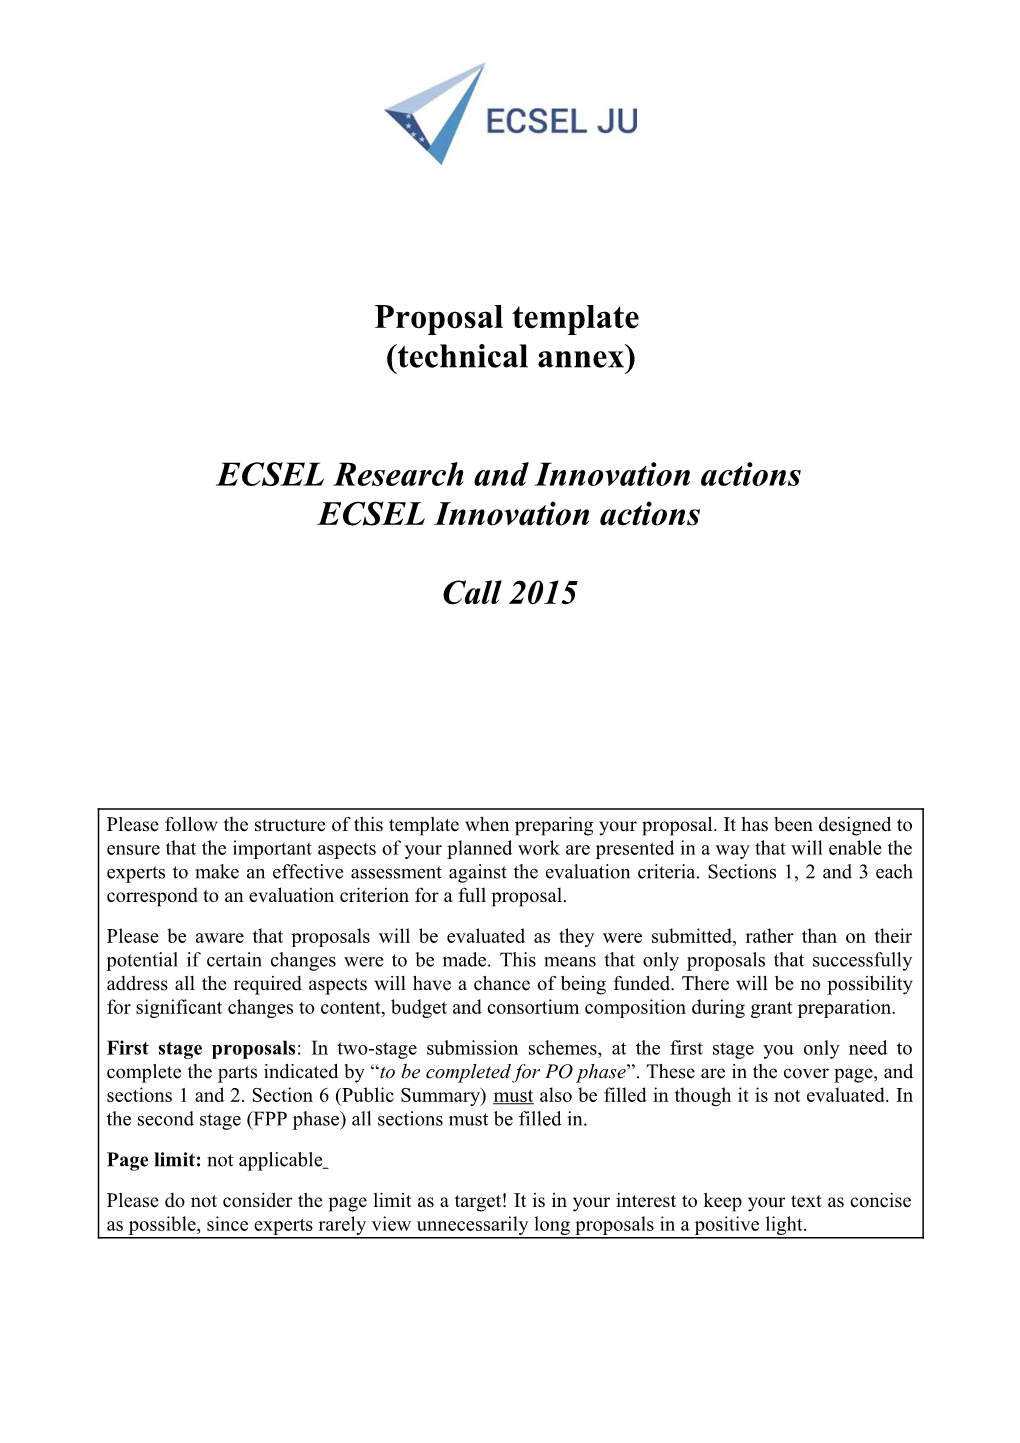 ECSEL Research and Innovation Actions